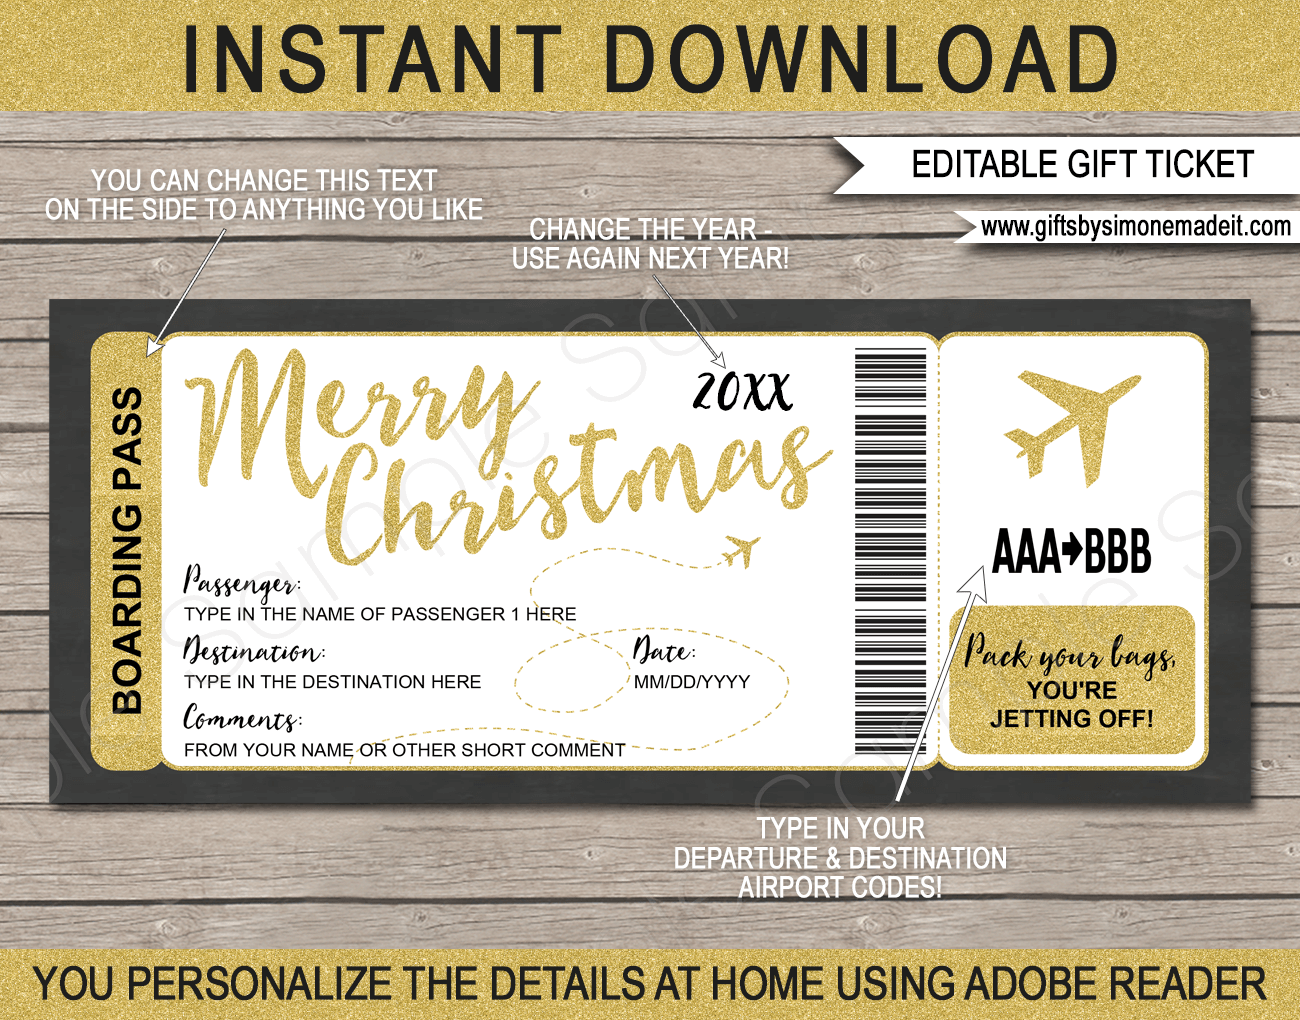 Printable Christmas Plane Boarding Pass Gift Template | Fake Plane Gift Ticket | Surprise Trip Reveal | Flight, Holiday, Getaway, Vacation | INSTANT DOWNLOAD via giftsbysimonemadeit.com